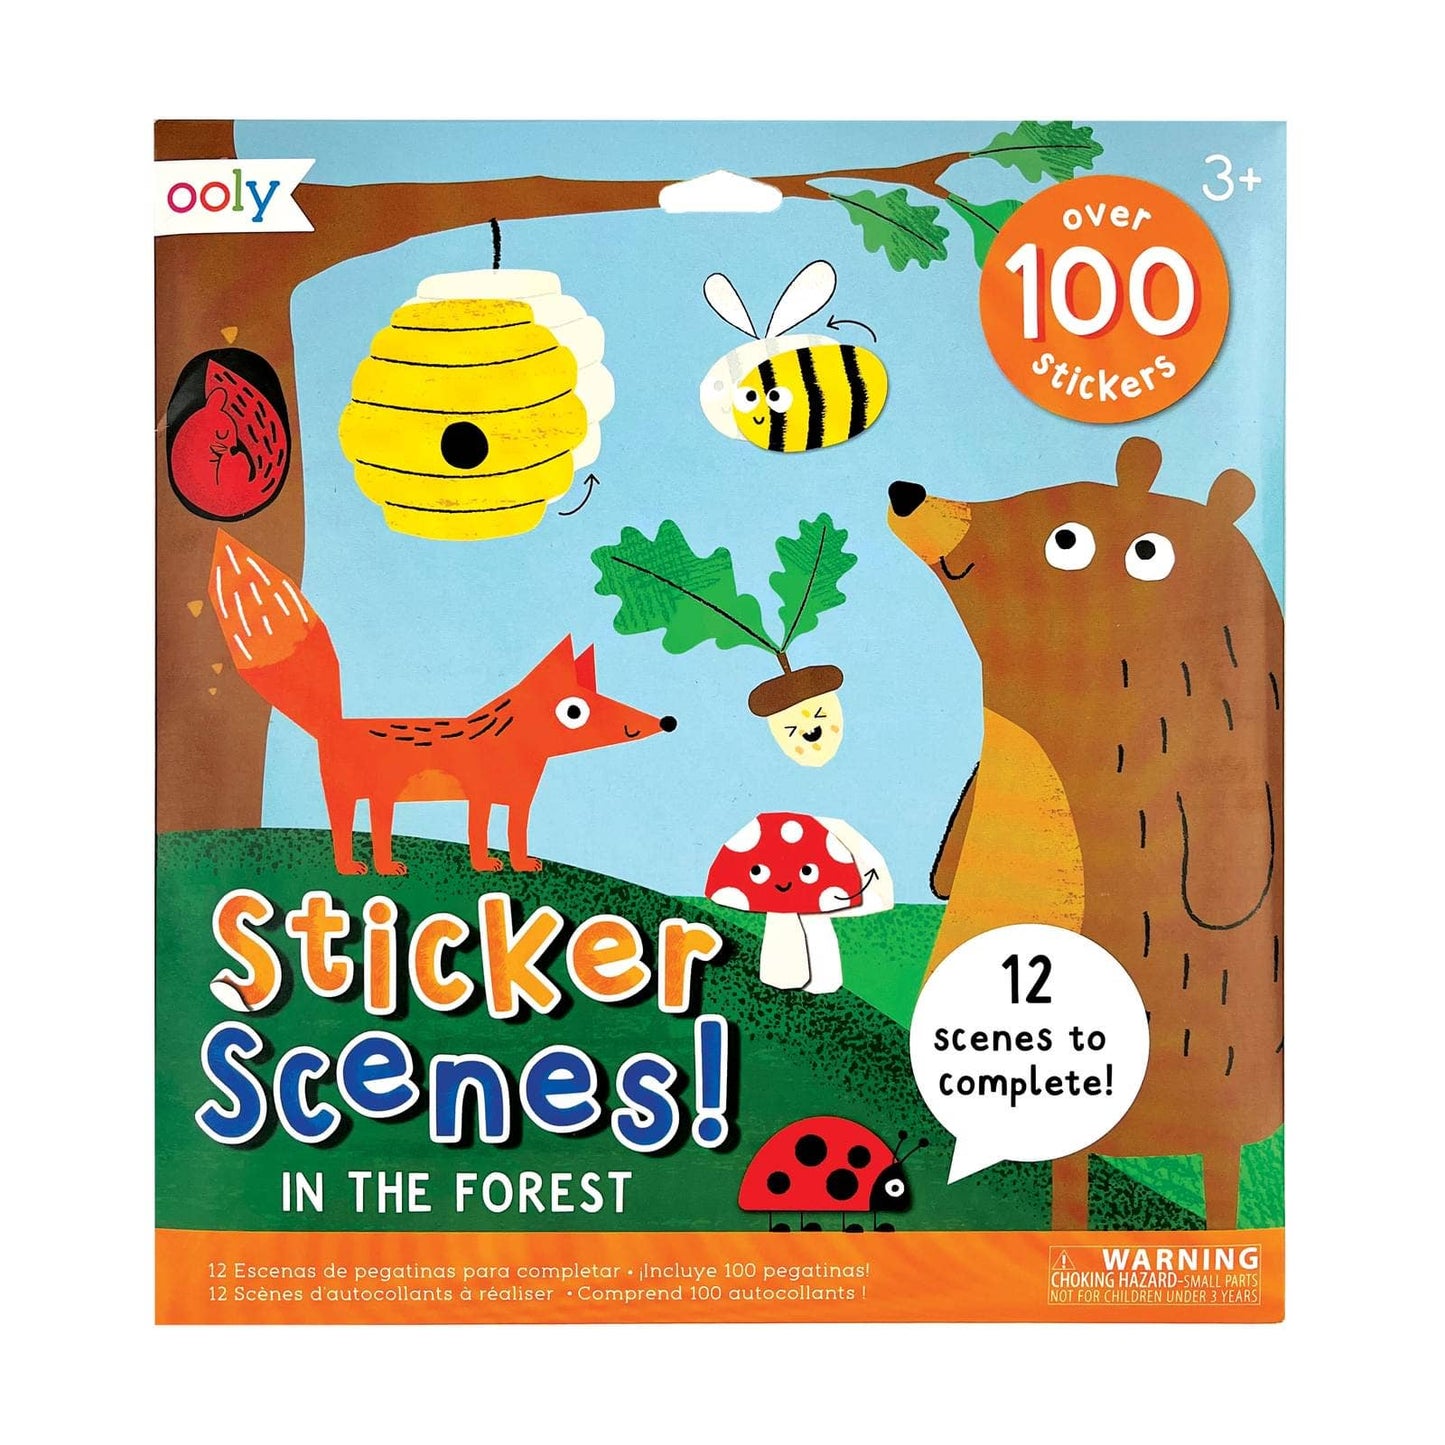 ooly; Sticker Scenes! - In the Forest